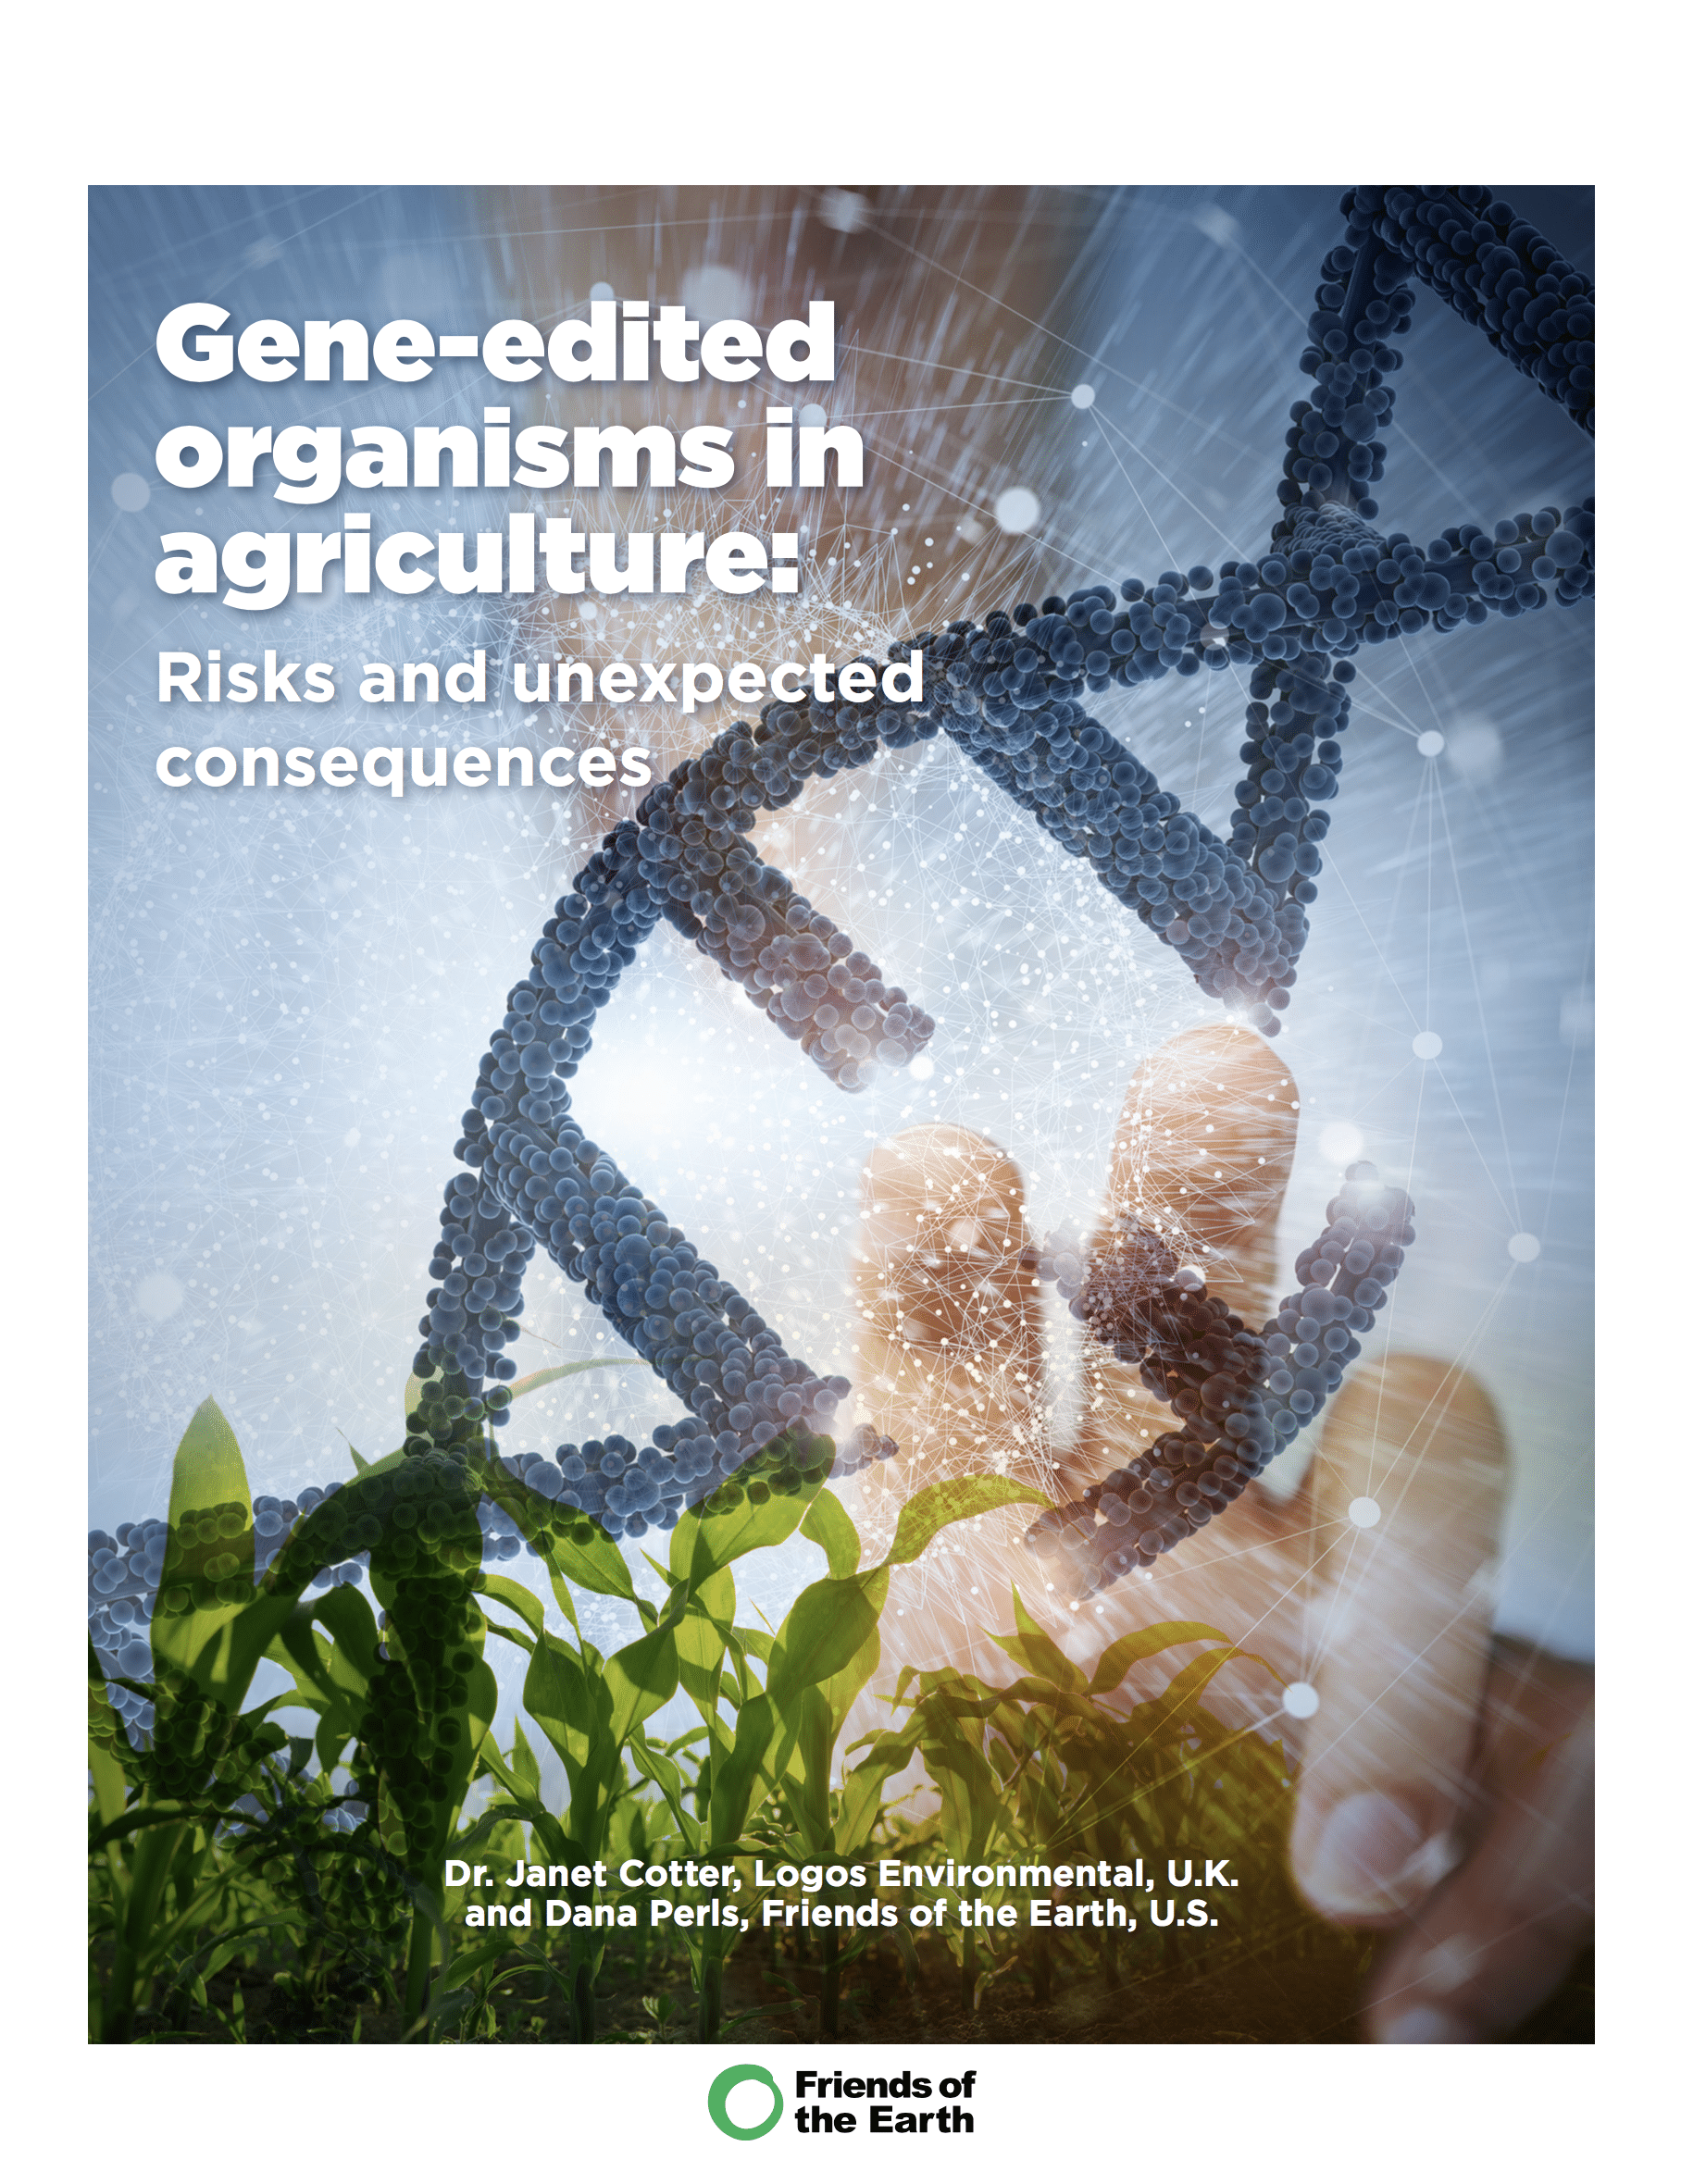 Gene-edited organisms in agriculture: Risks and unexpected consequences